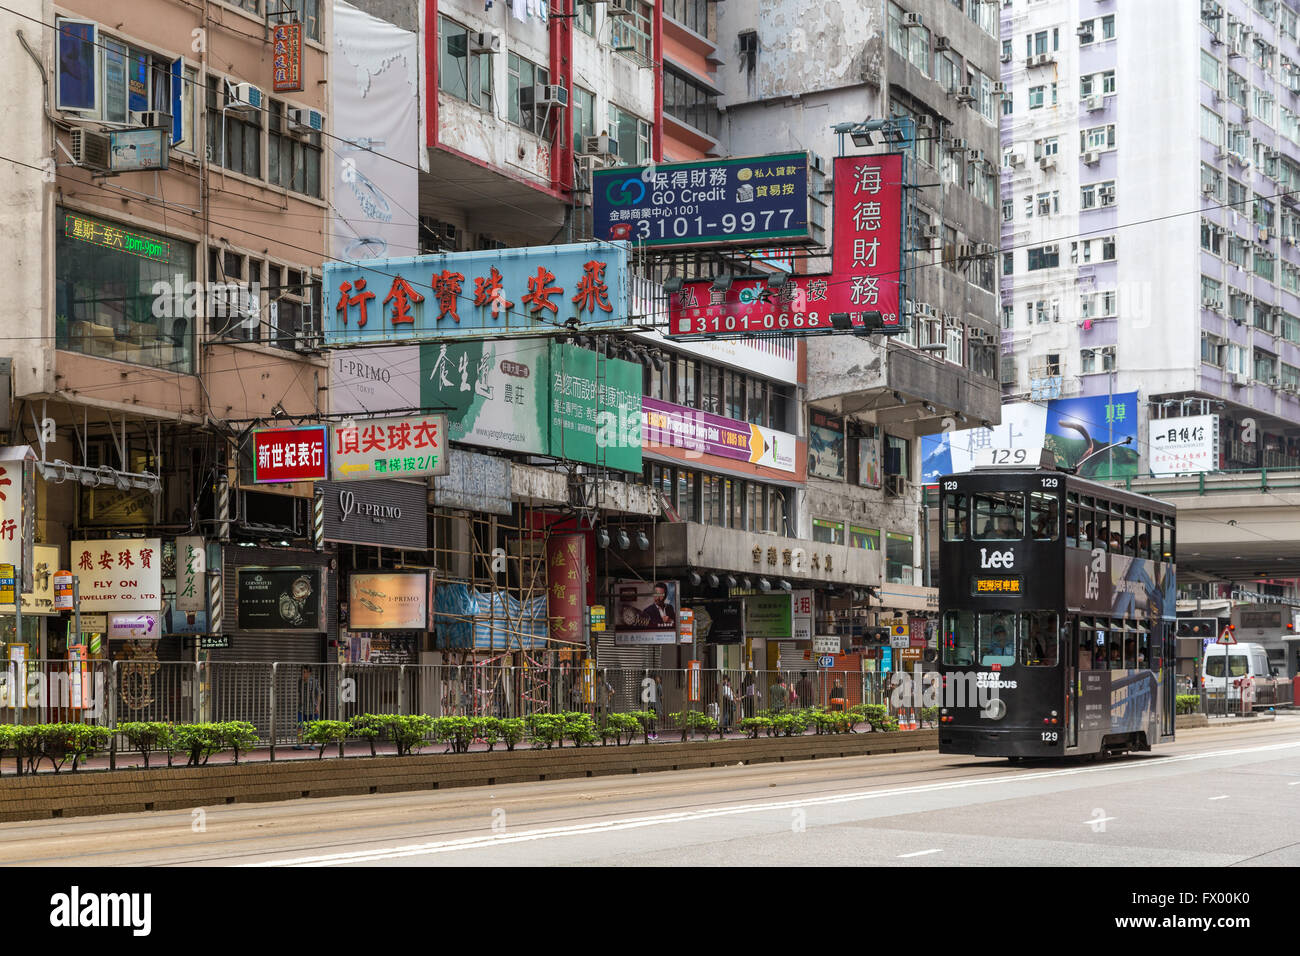 Double-decker tram and buildings at the heavily built-up Causeway Bay in Hong Kong, China. Stock Photo